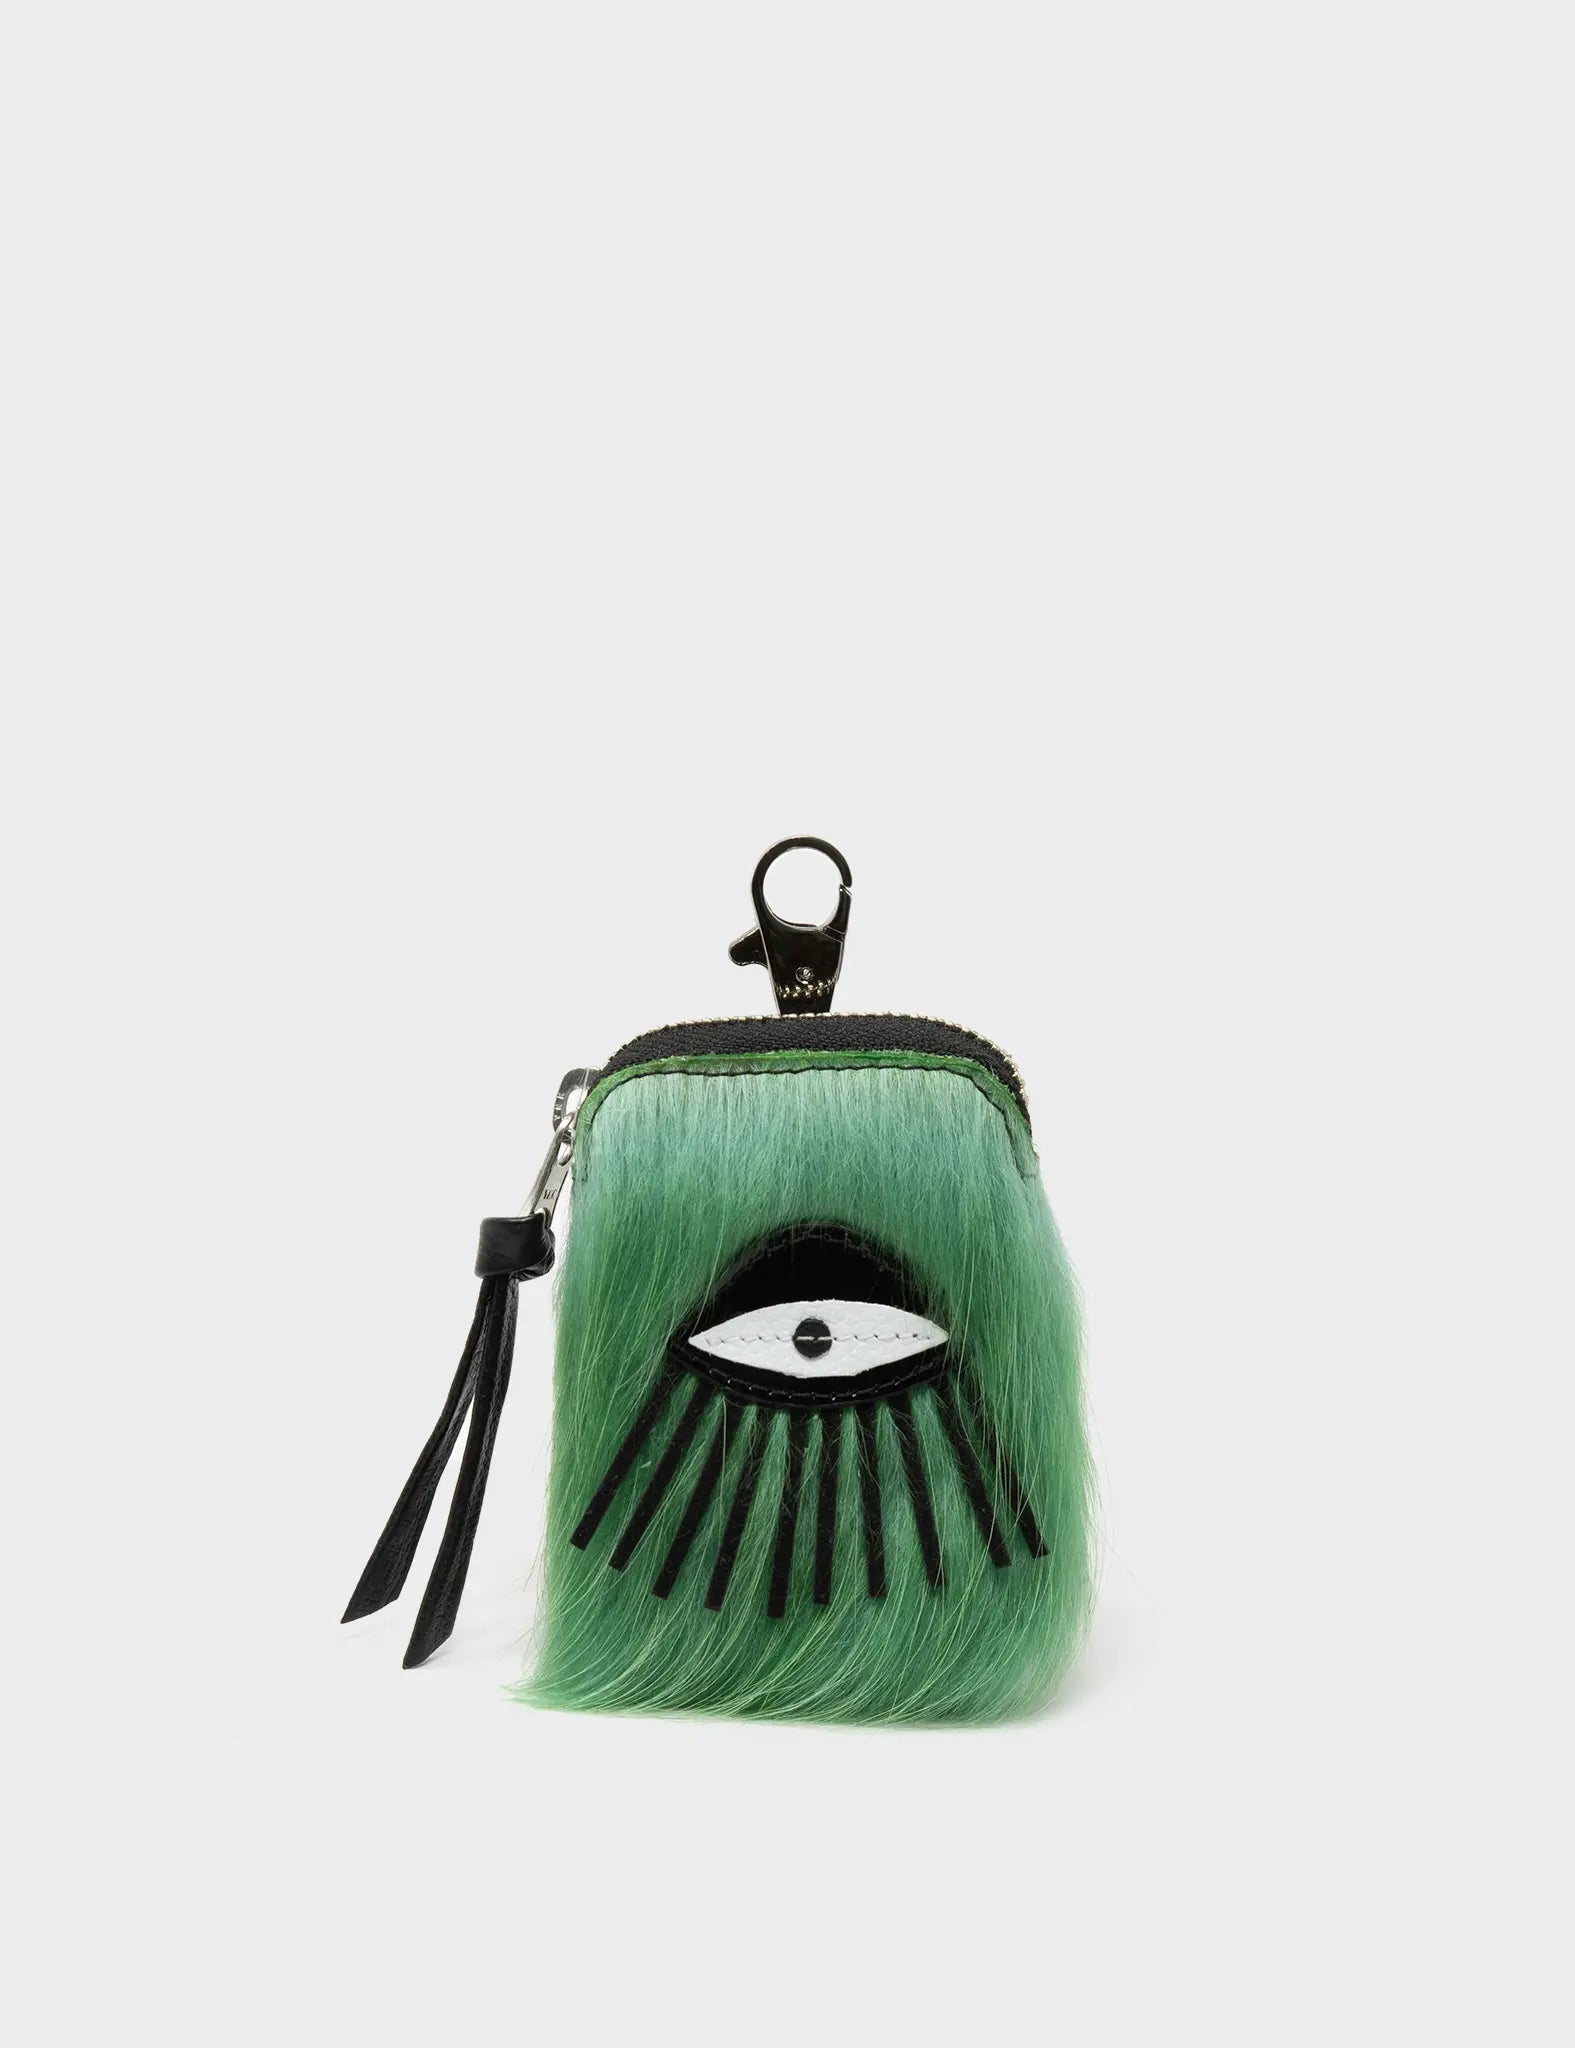 Florence Pouch Charm - Green Fur Leather Keychain Eye Applique - Front view